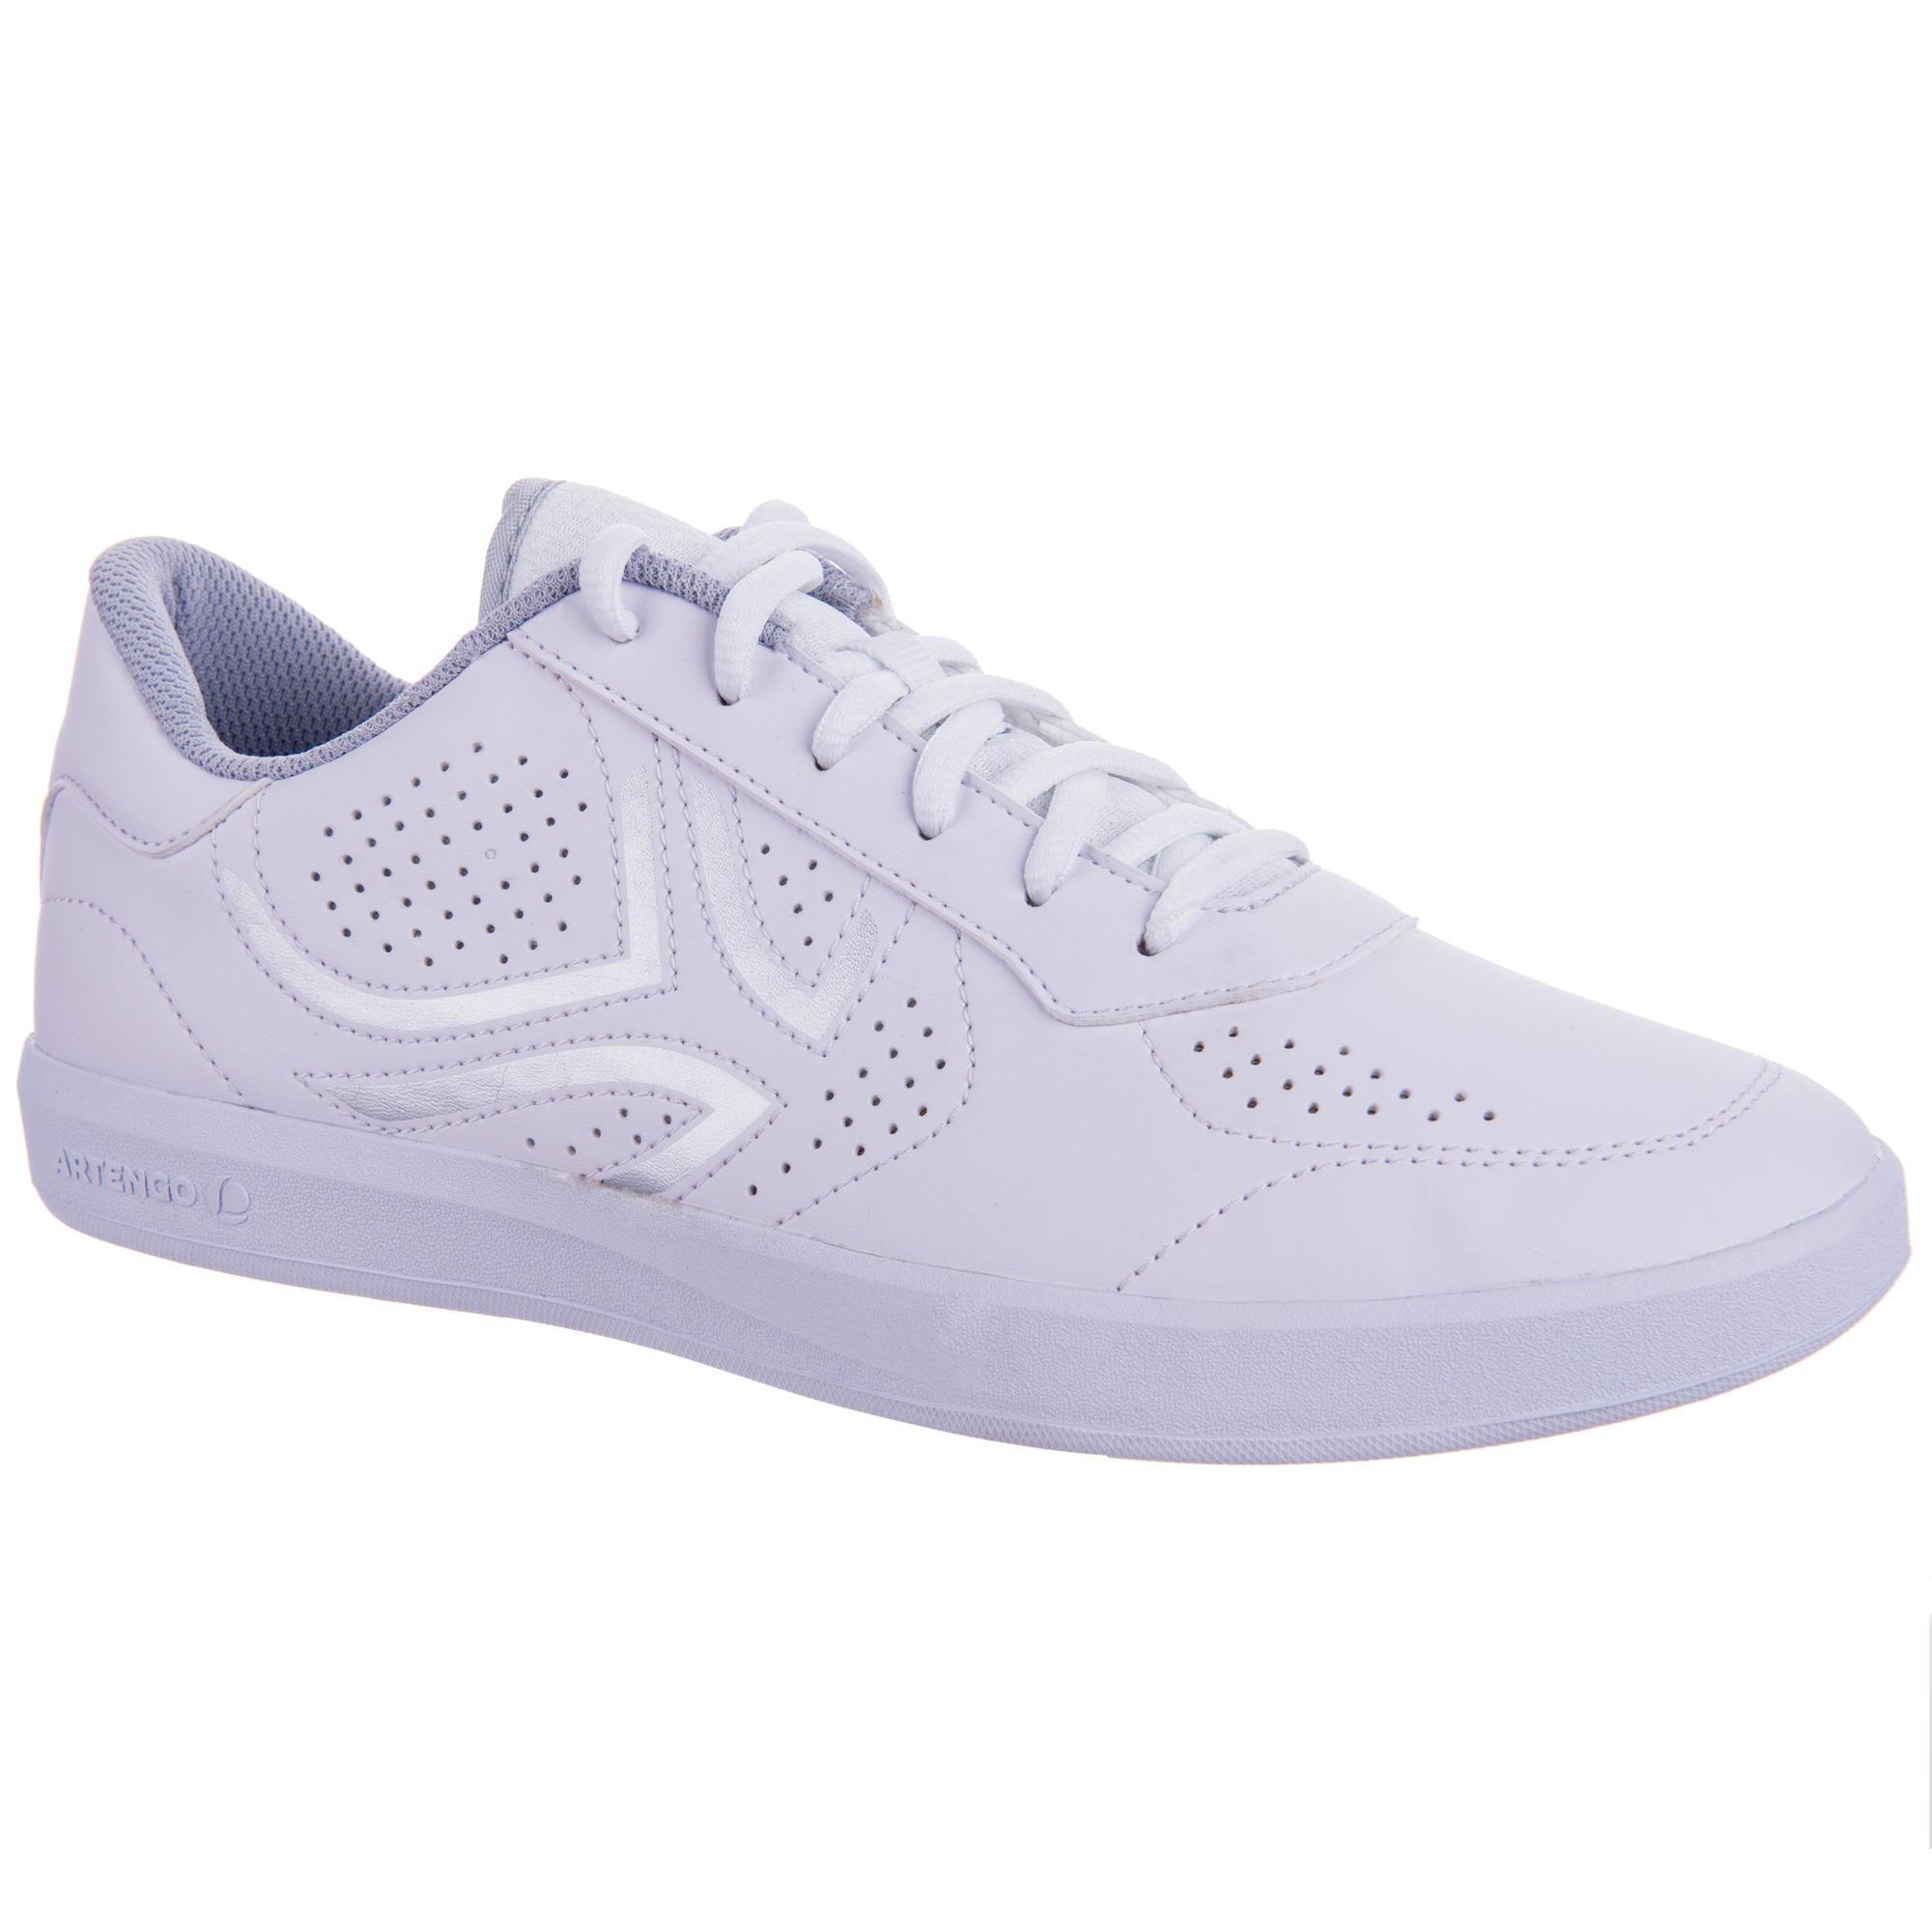 white tennis trainers